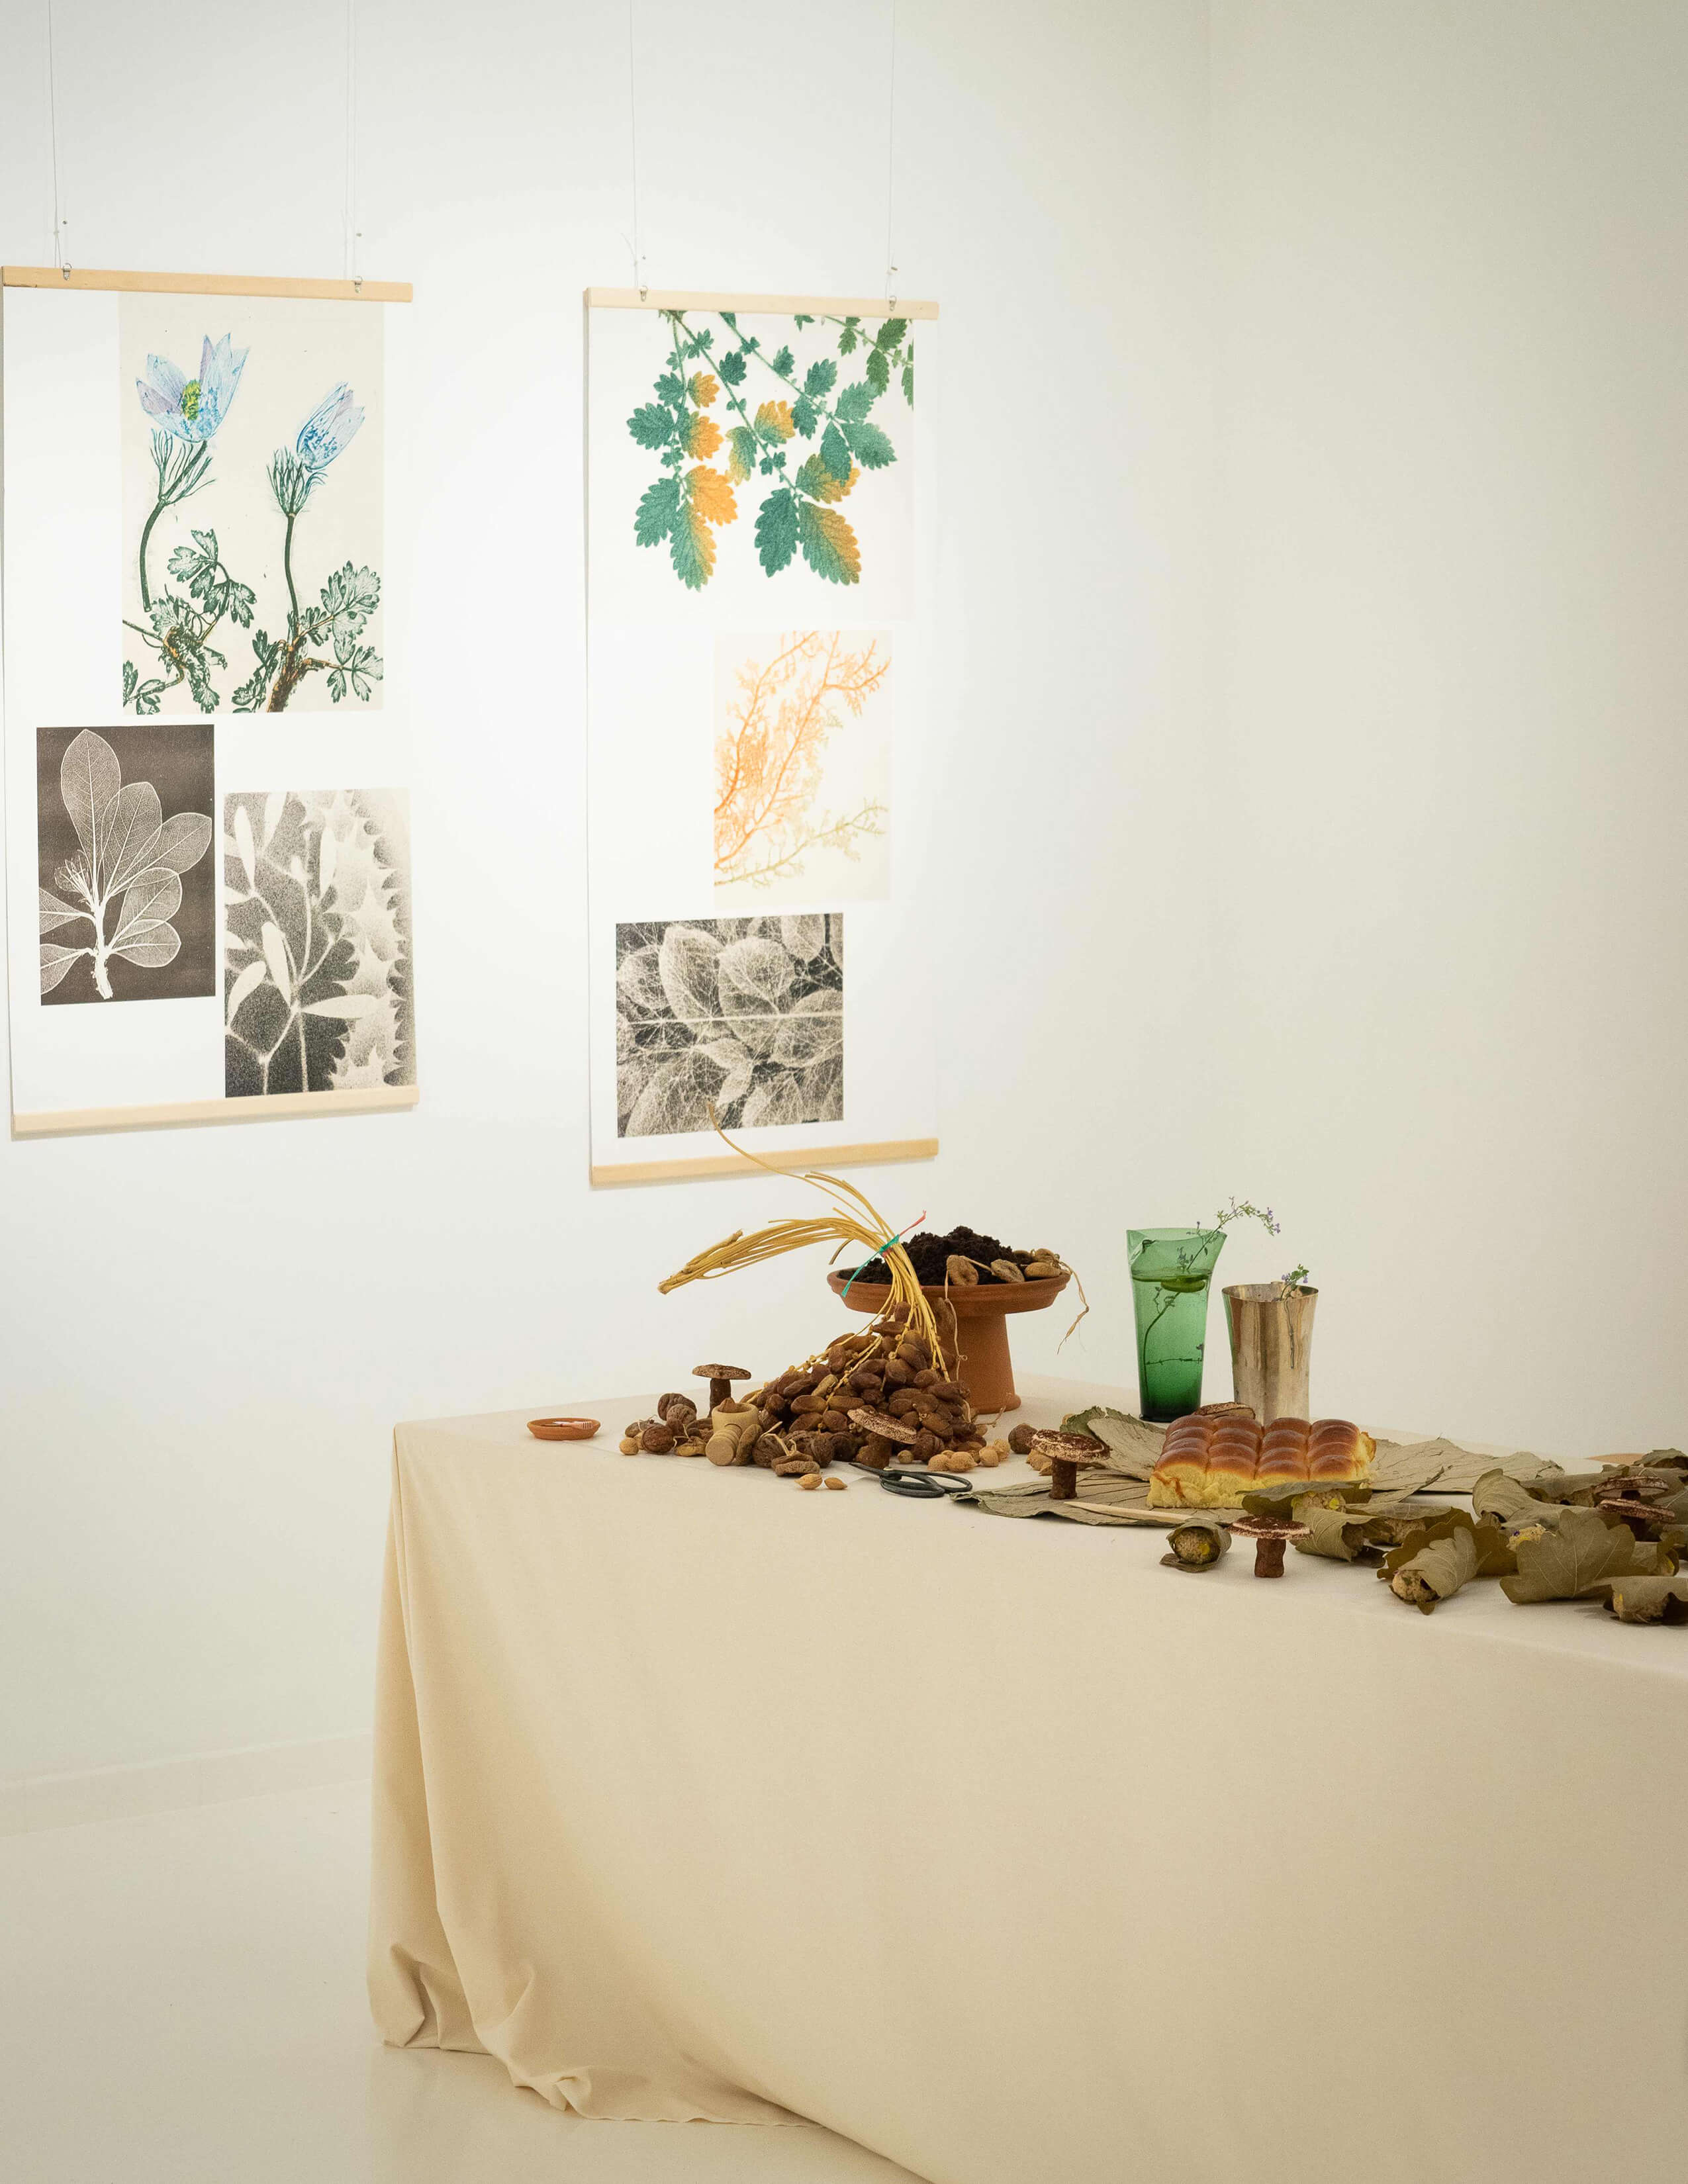 Different kinds of food are presented on the table with white tablecloths and a few pieces of plant-themed paintings hung on the wall.